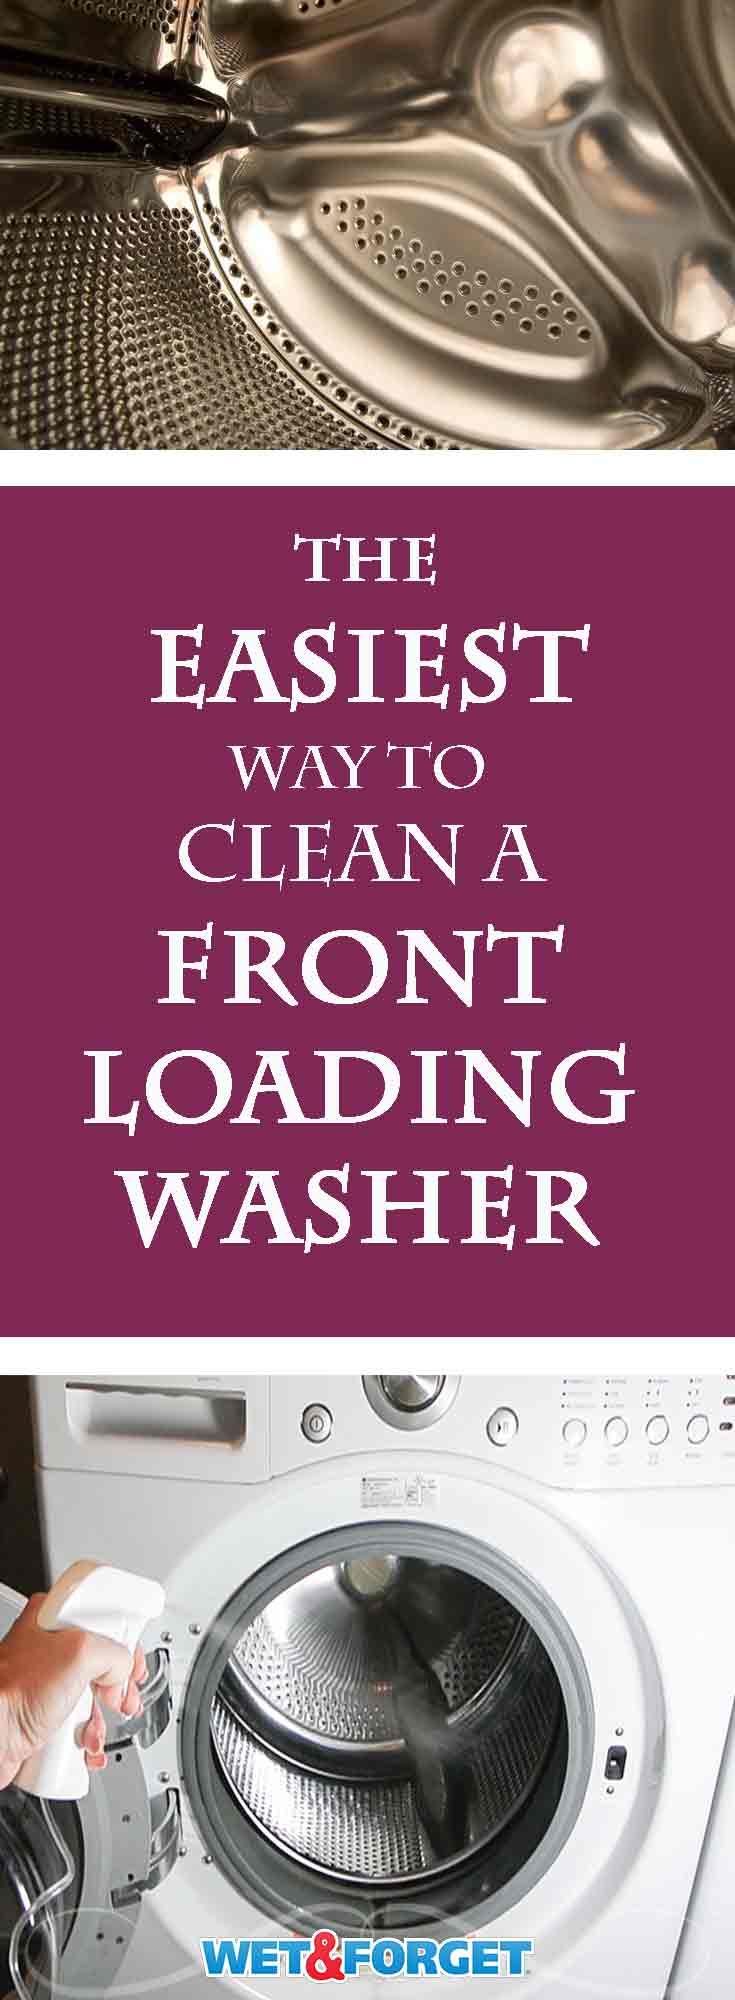 Easiest way to clean a front loading washer